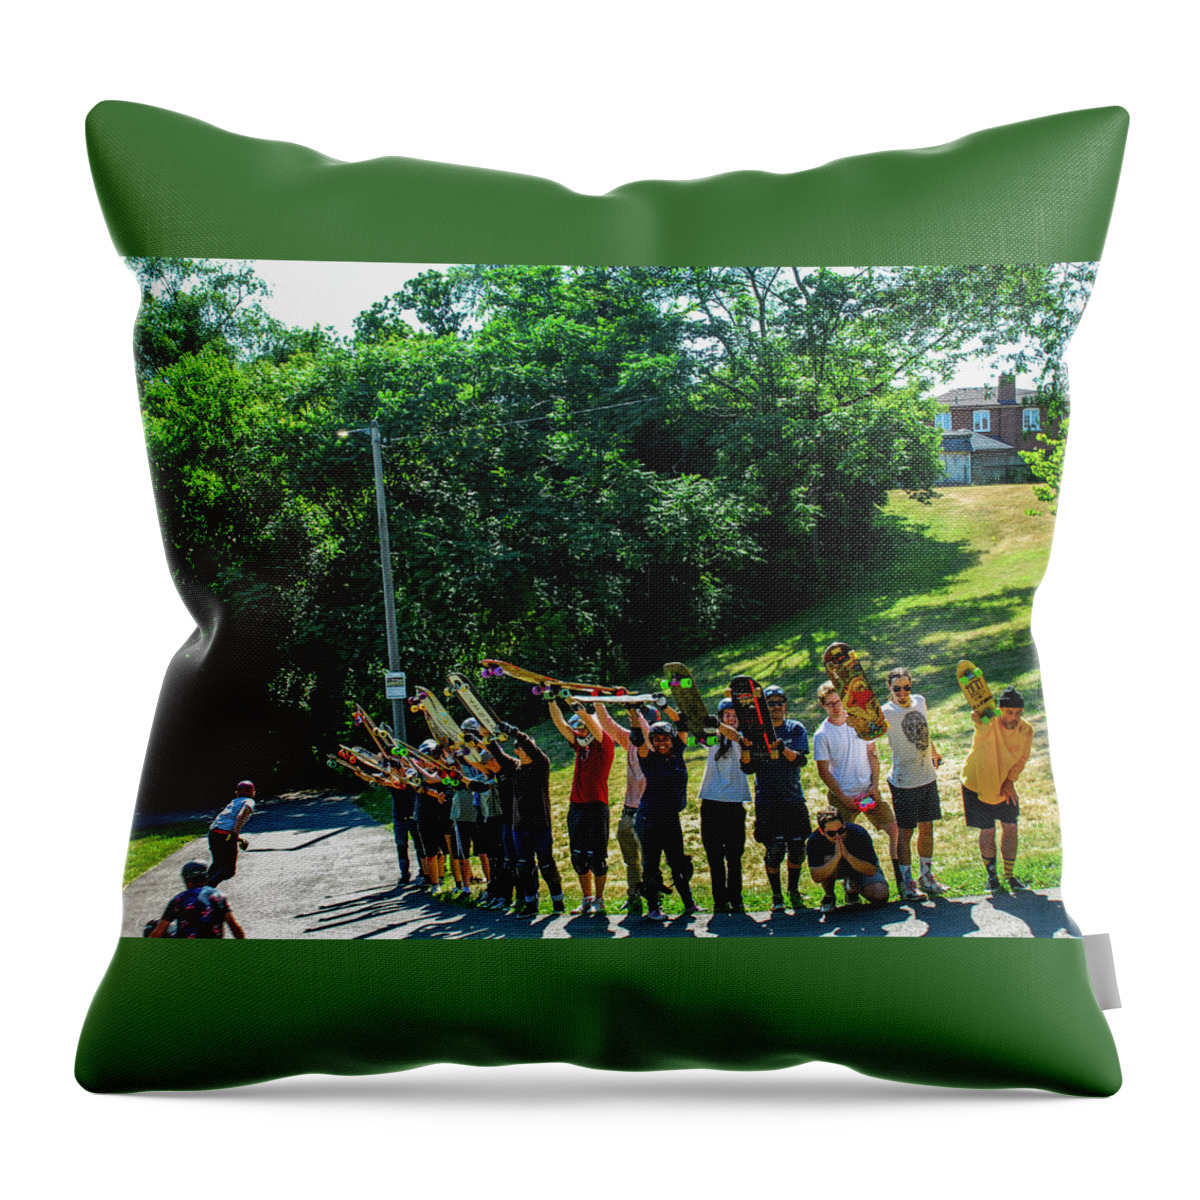 Skater Throw Pillow featuring the photograph 171 by Ee Photography